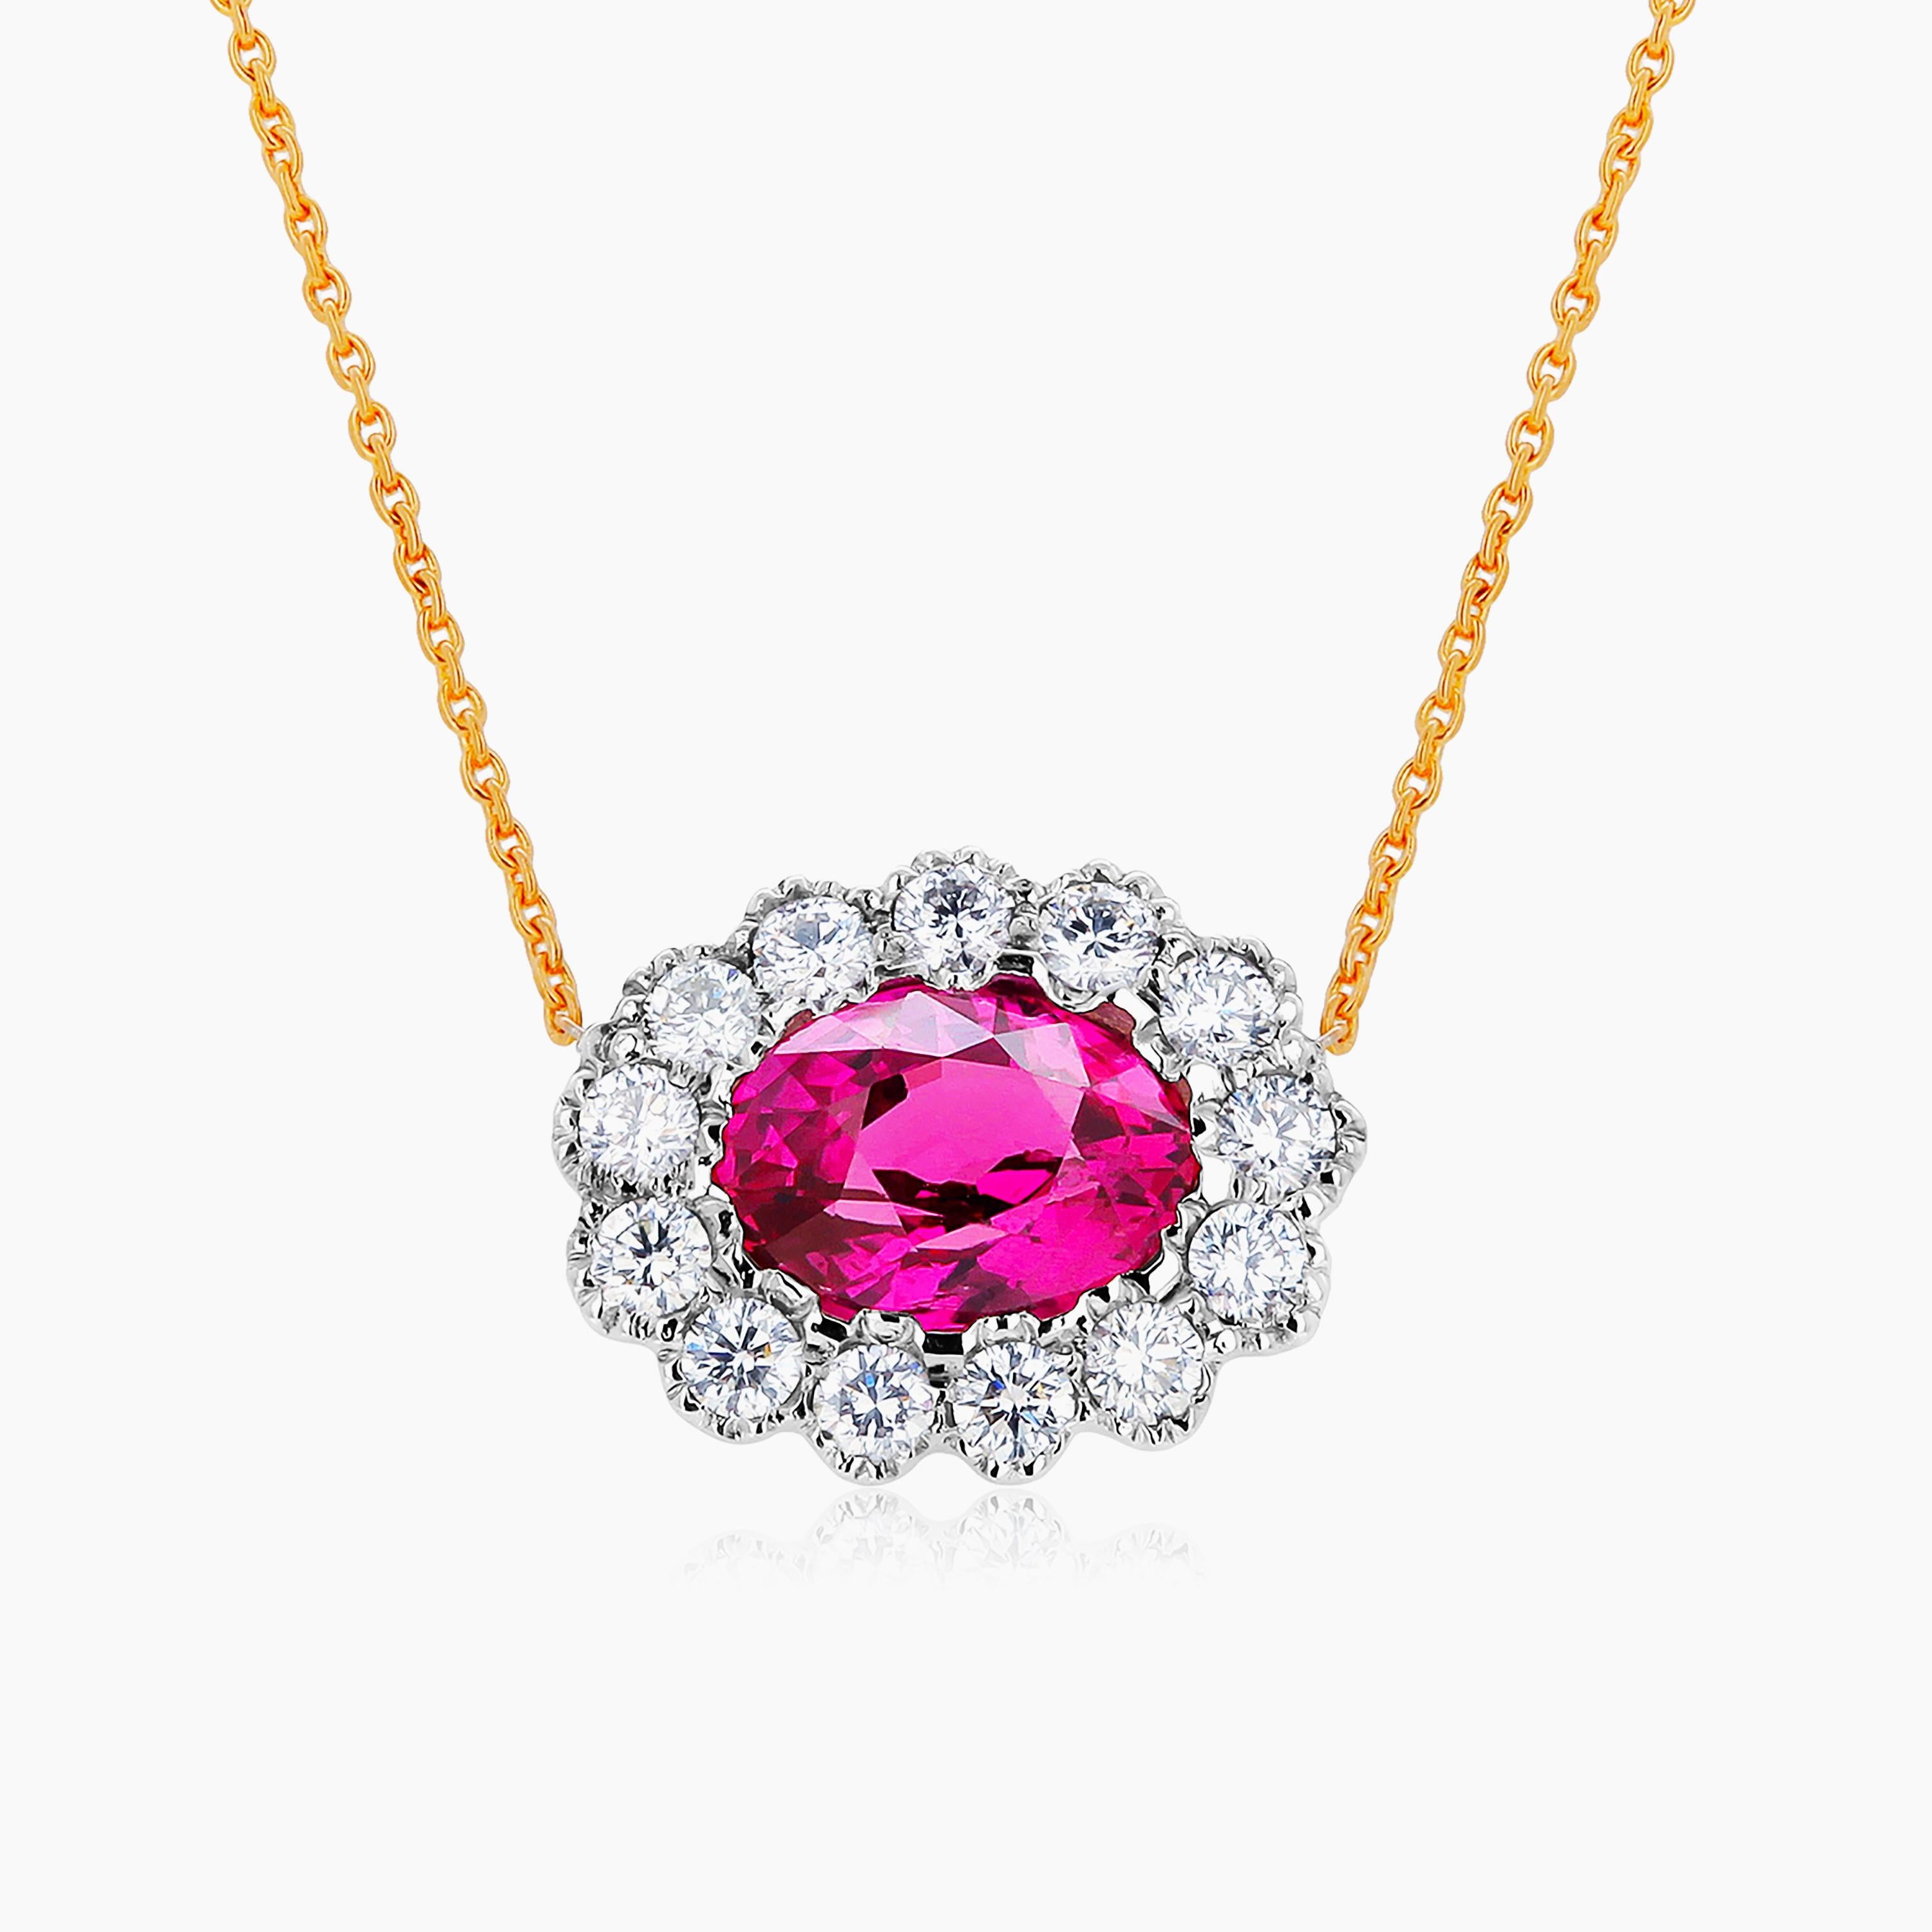 Contemporary Oval Ruby Surrounded by Diamonds White and Rose Gold Layered Necklace Pendant